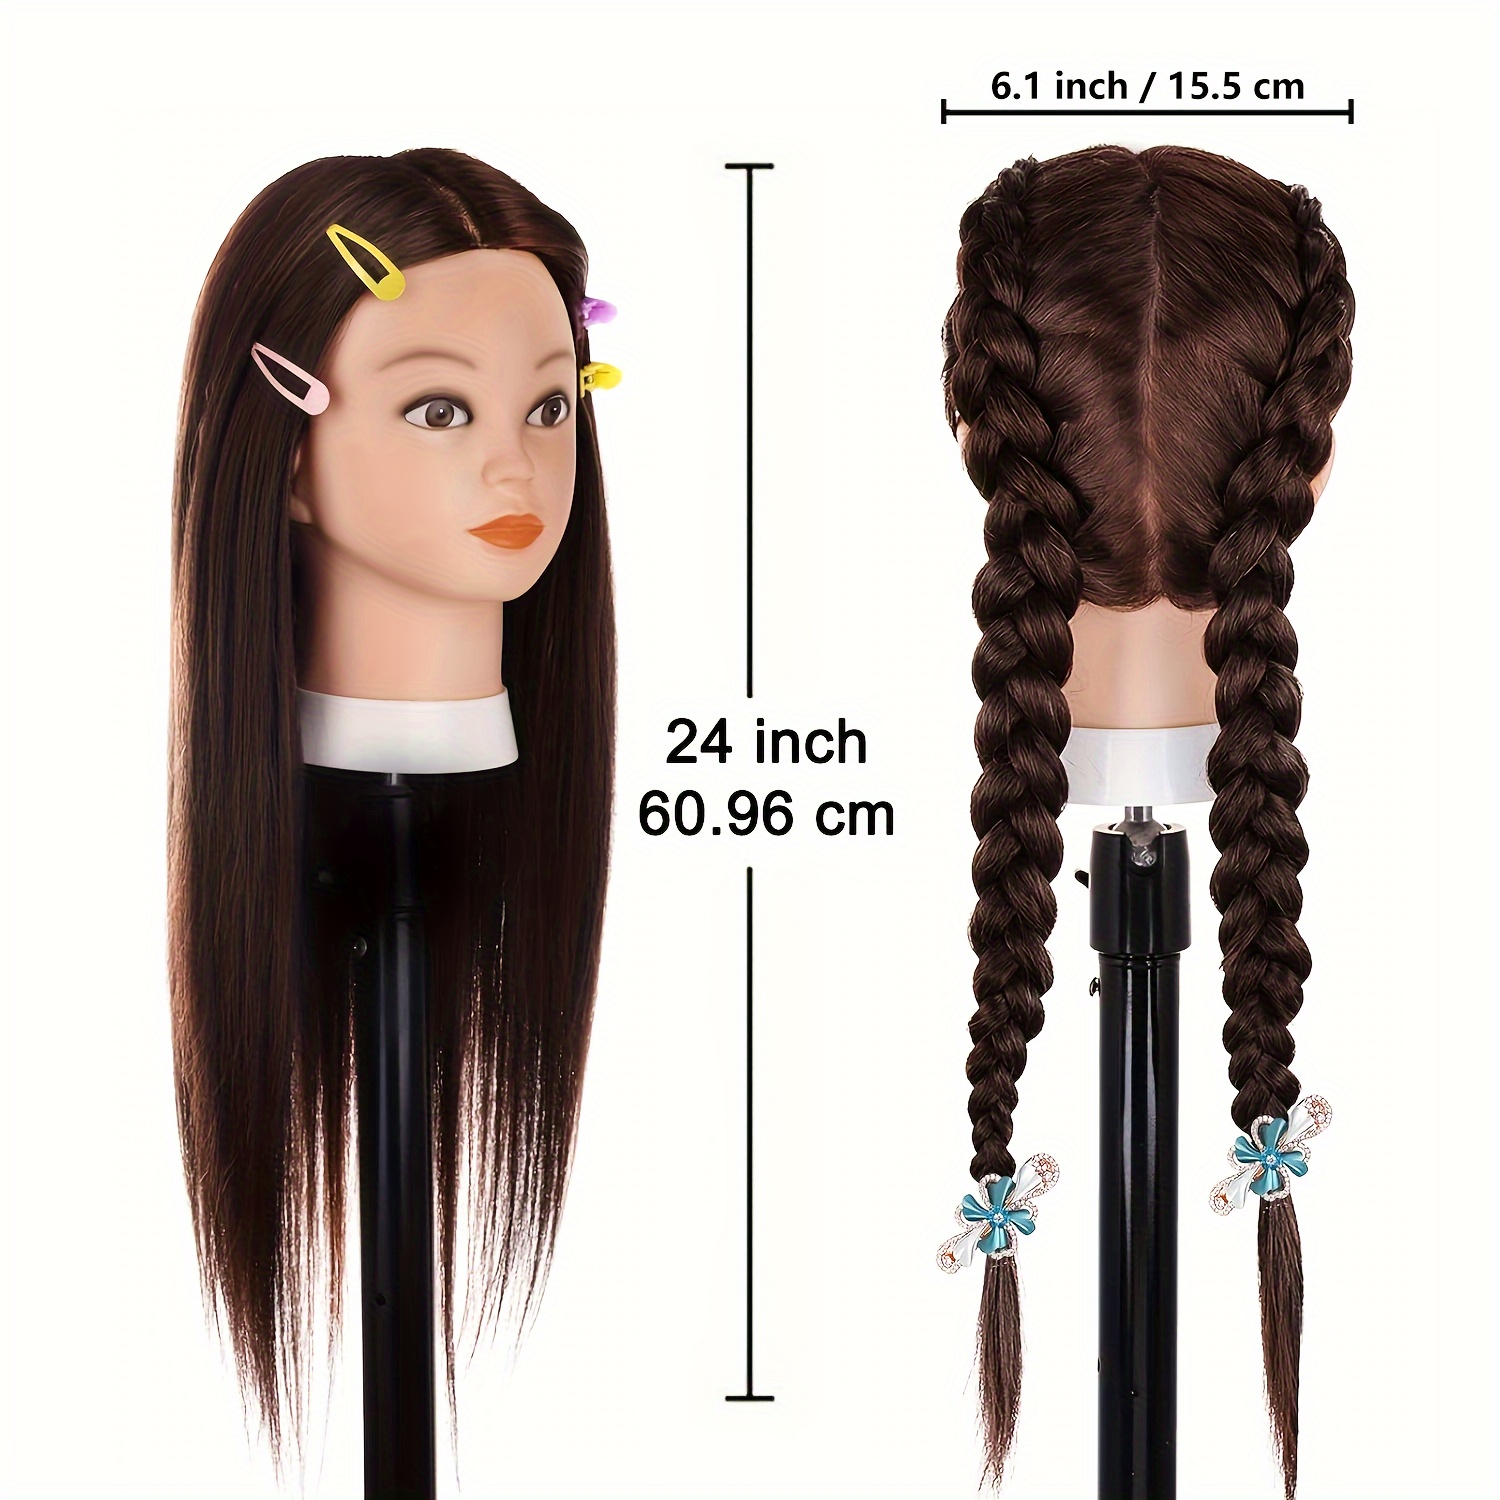 Mannequin Head Real Human Hair for Styling Braid Practice